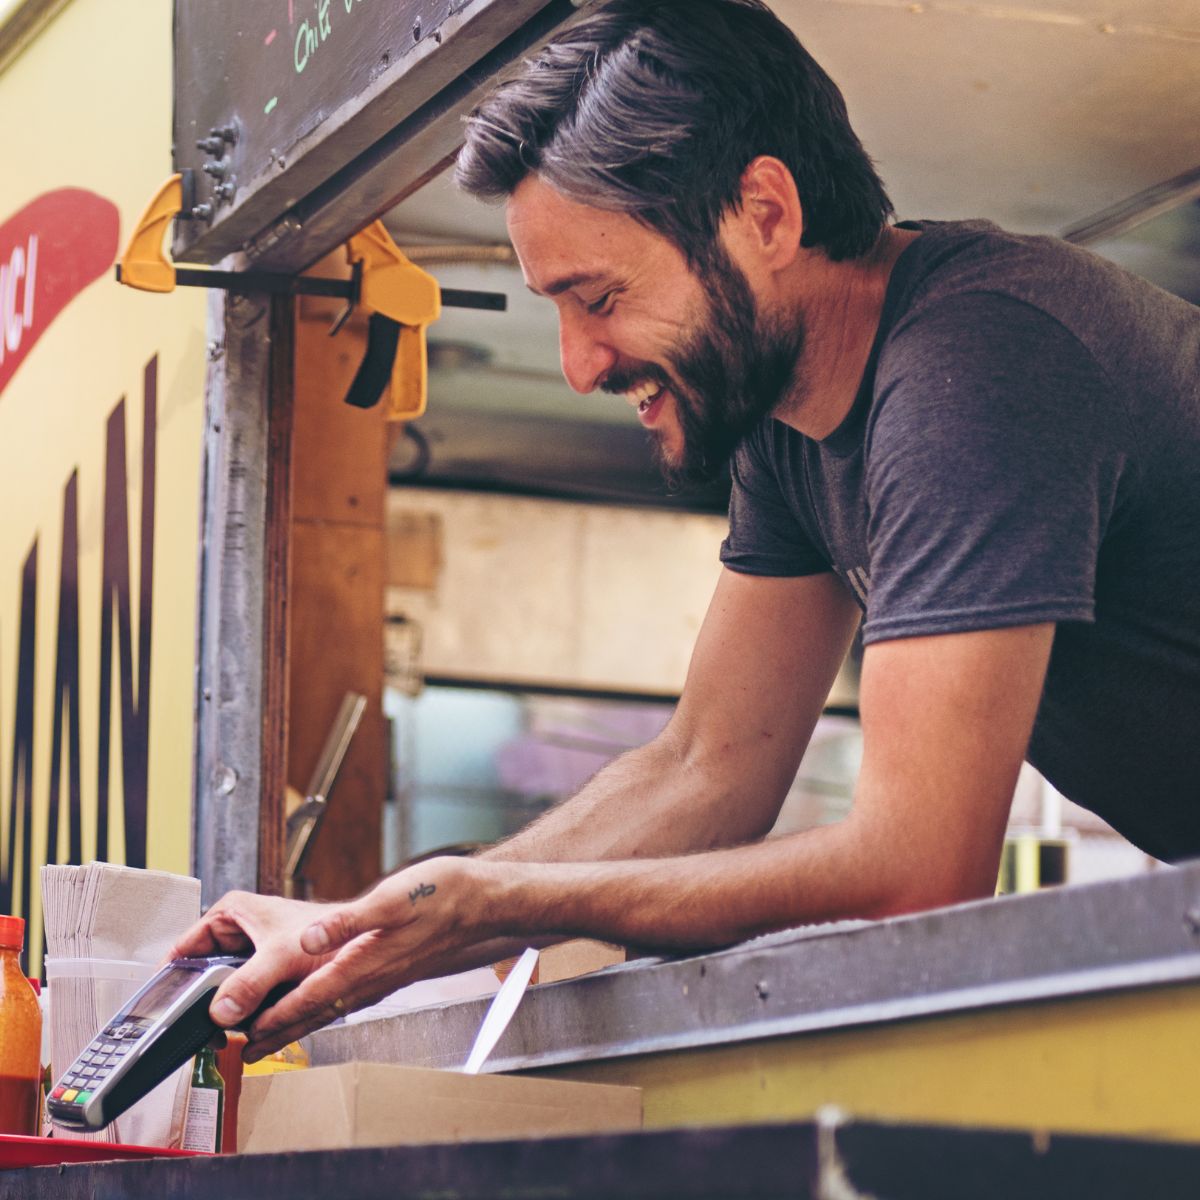 man in food truck accepts card payment via POS system